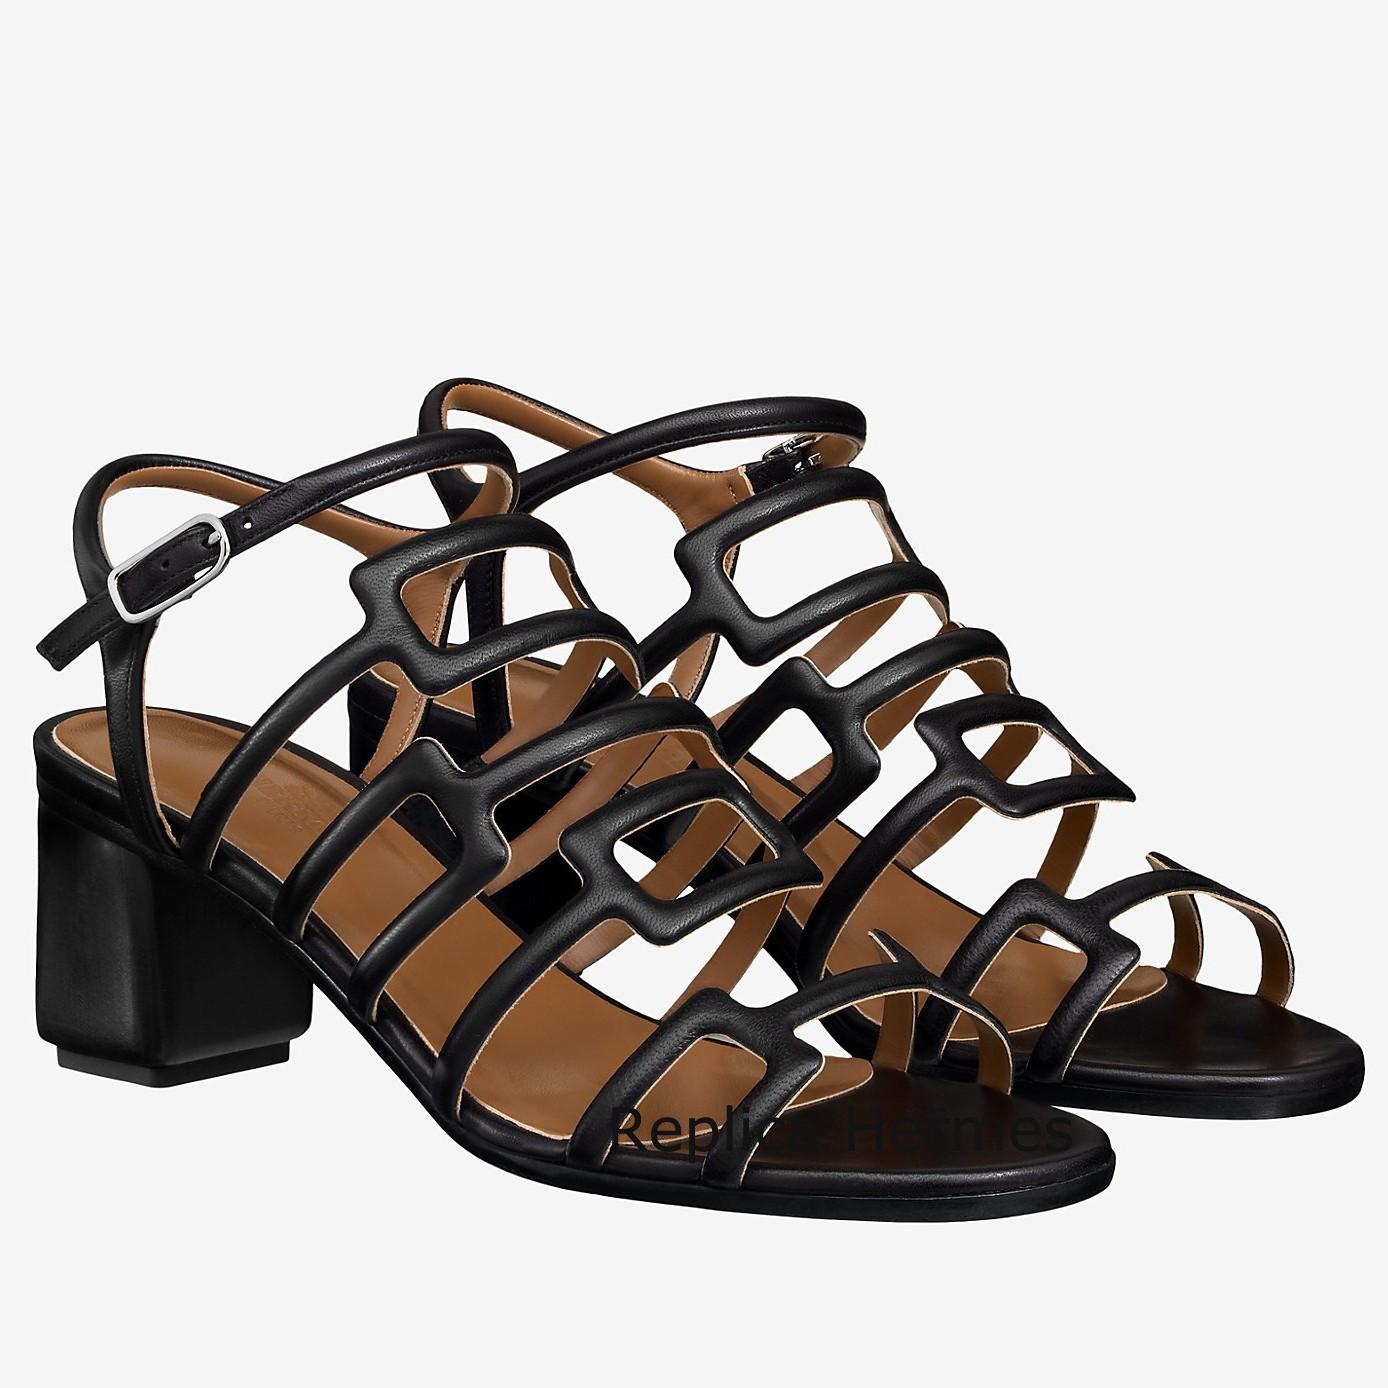 Imitation Hermes Oracle Sandals In Black Leather